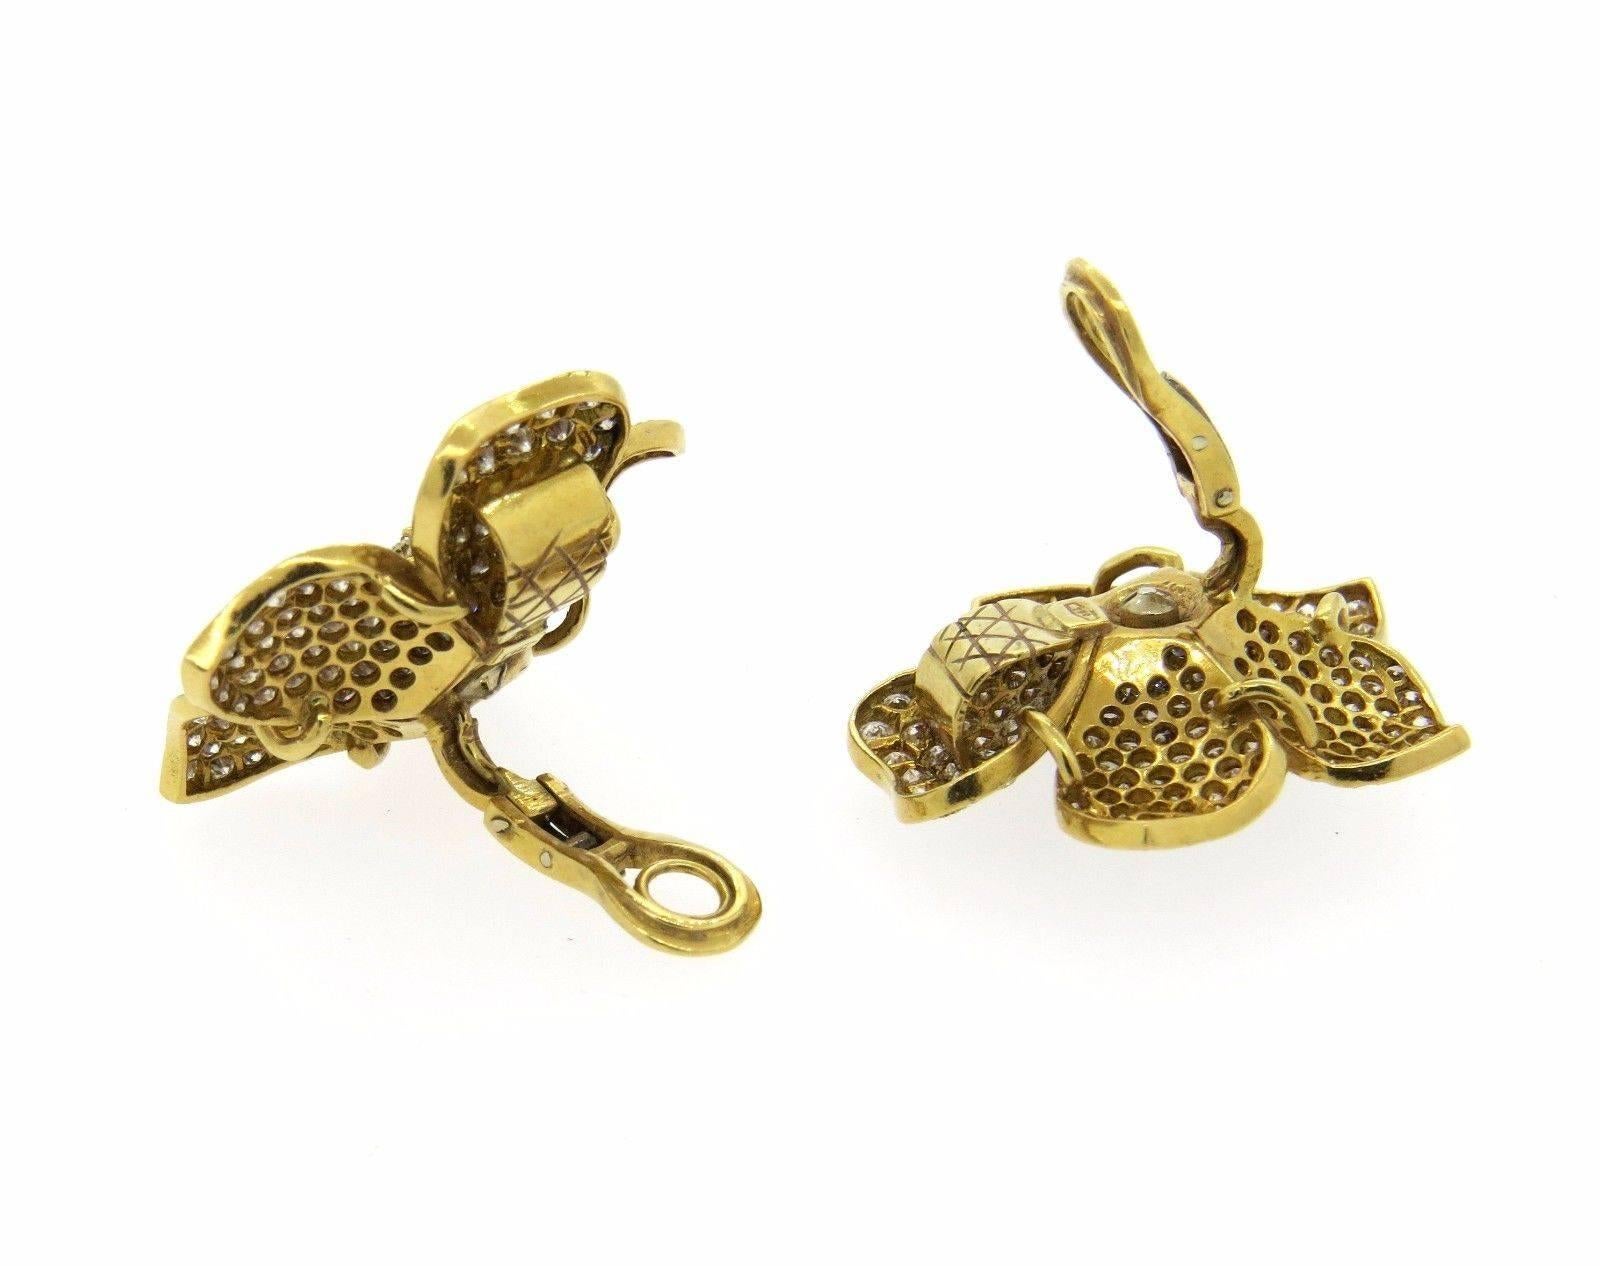 A pair of 18k yellow gold flower cocktail earrings set with approximately 9.50ctw in diamonds.  The earrings measure 33mm x 35mm and weigh 26 grams.